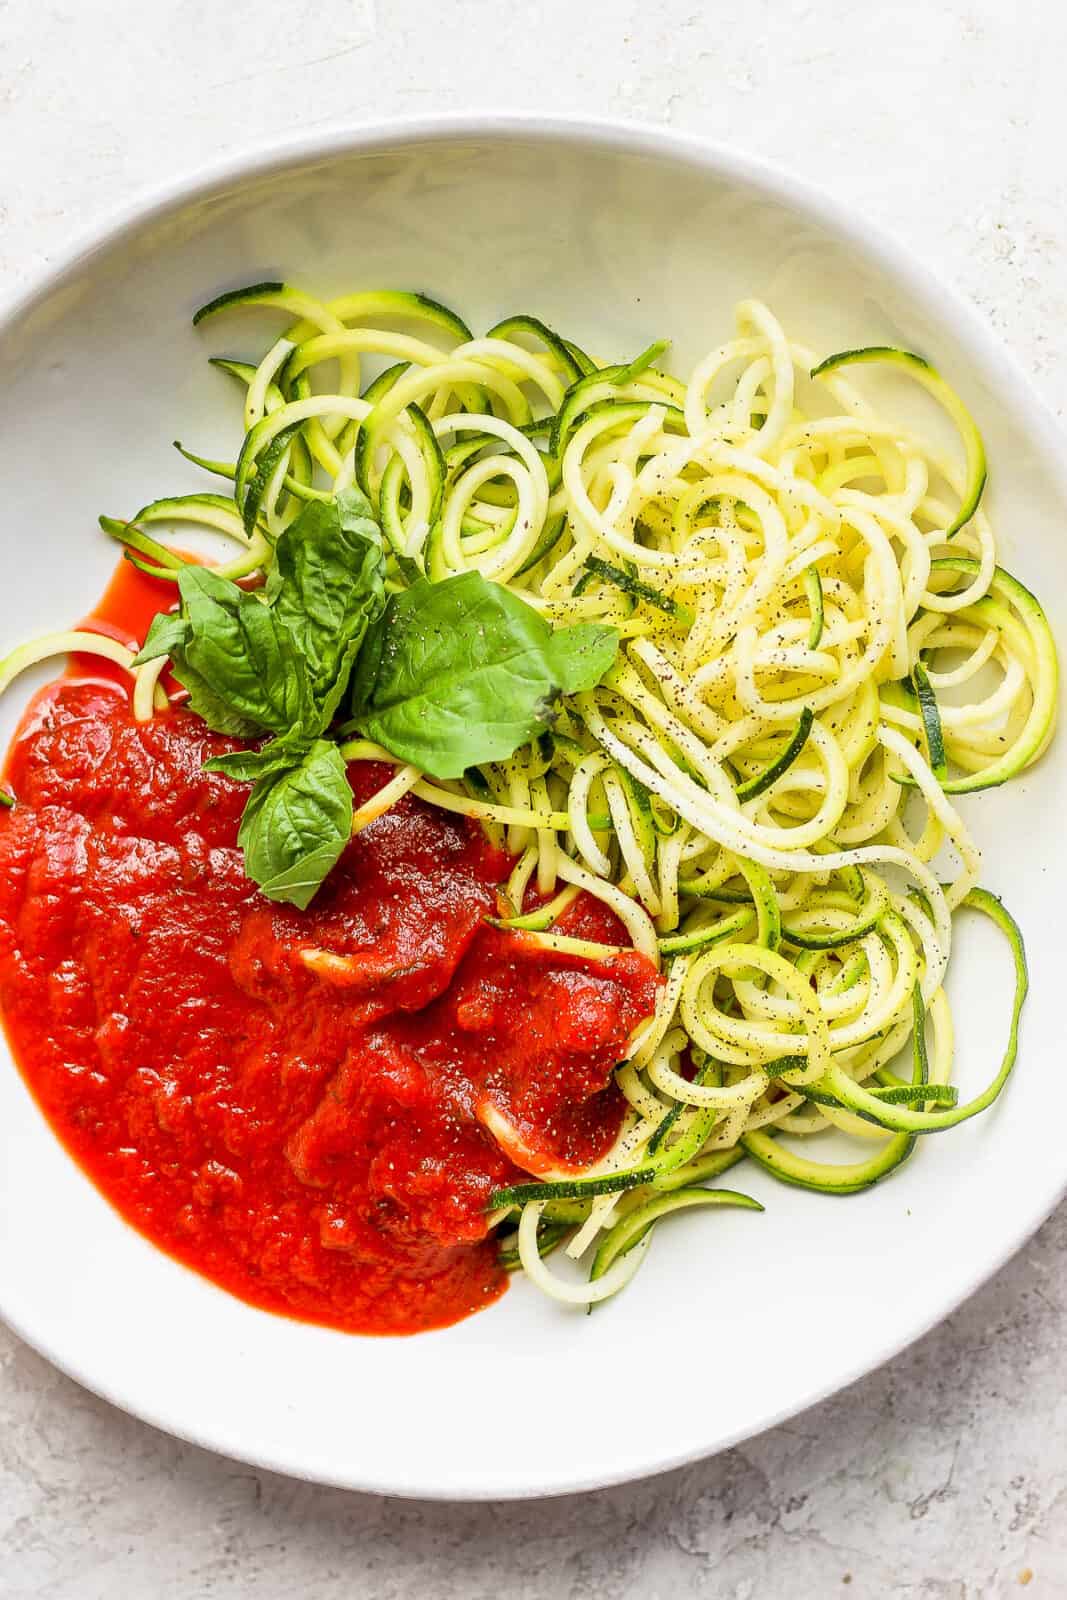 Zucchini noodles and pasta sauce in a bowl.